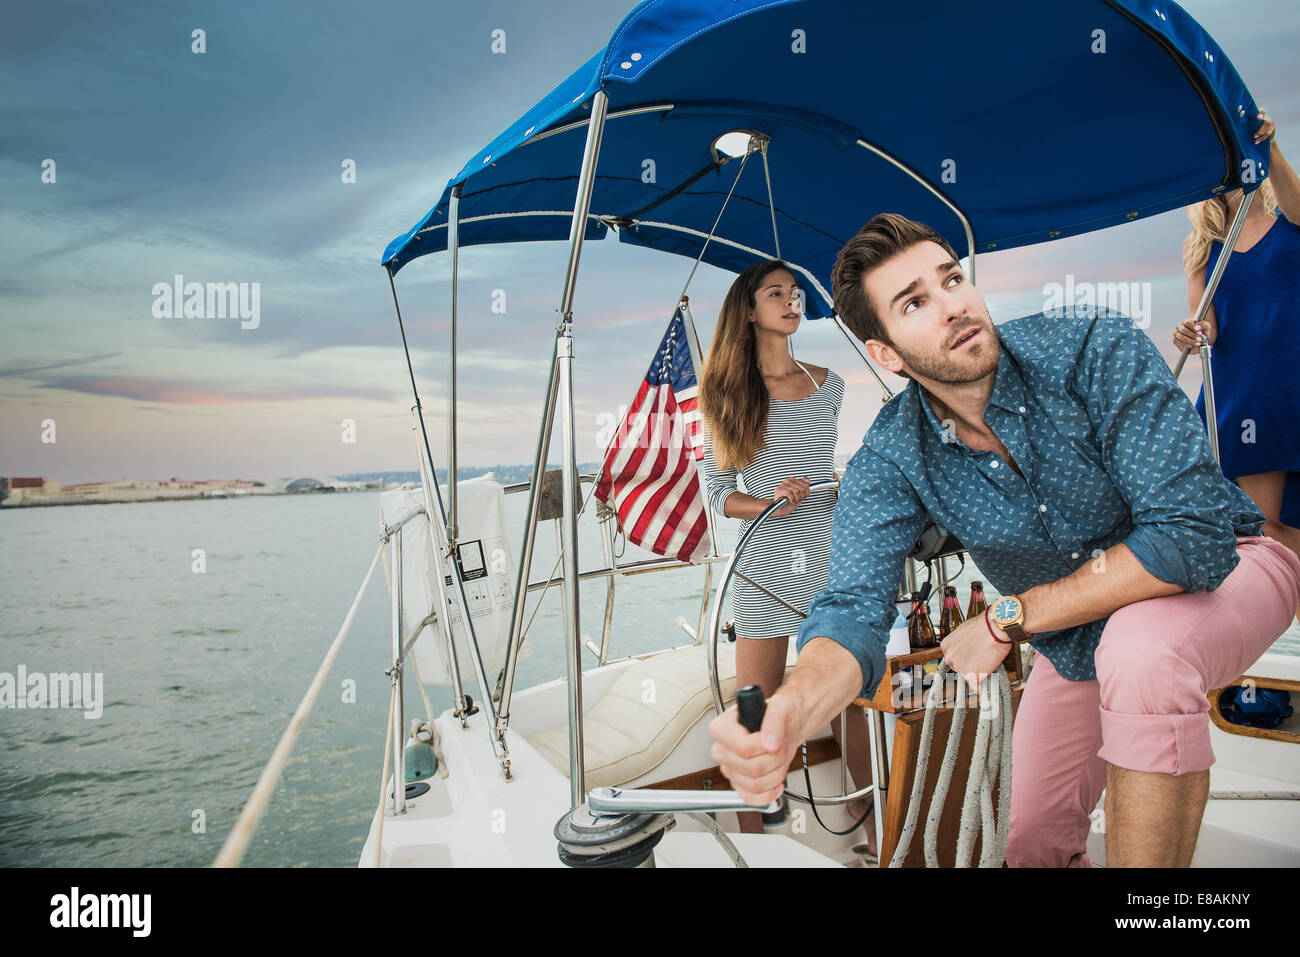 Mid adult man using winch on sailing boat Stock Photo